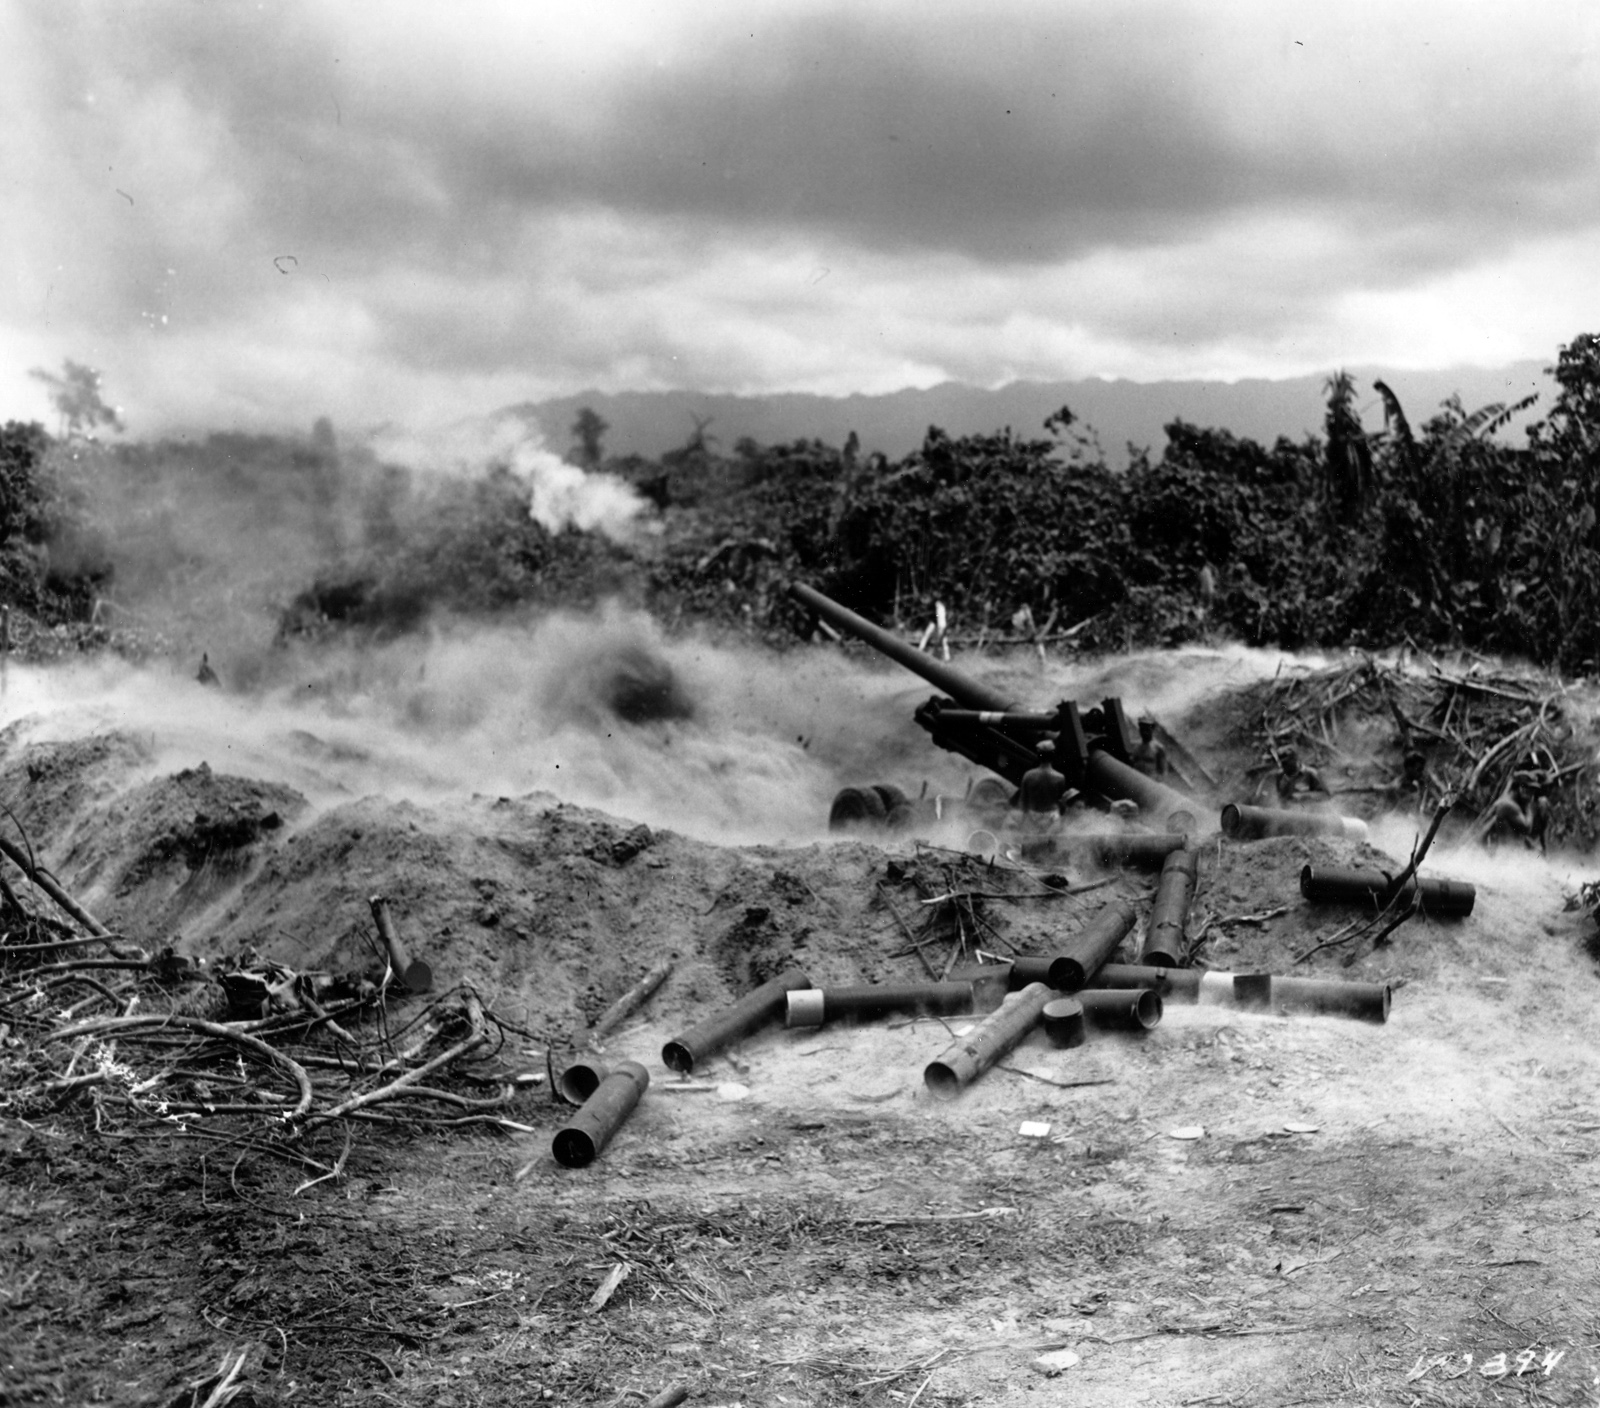 Bougainville: The Battle for Hill 260, 1944 – 182nd Infantry